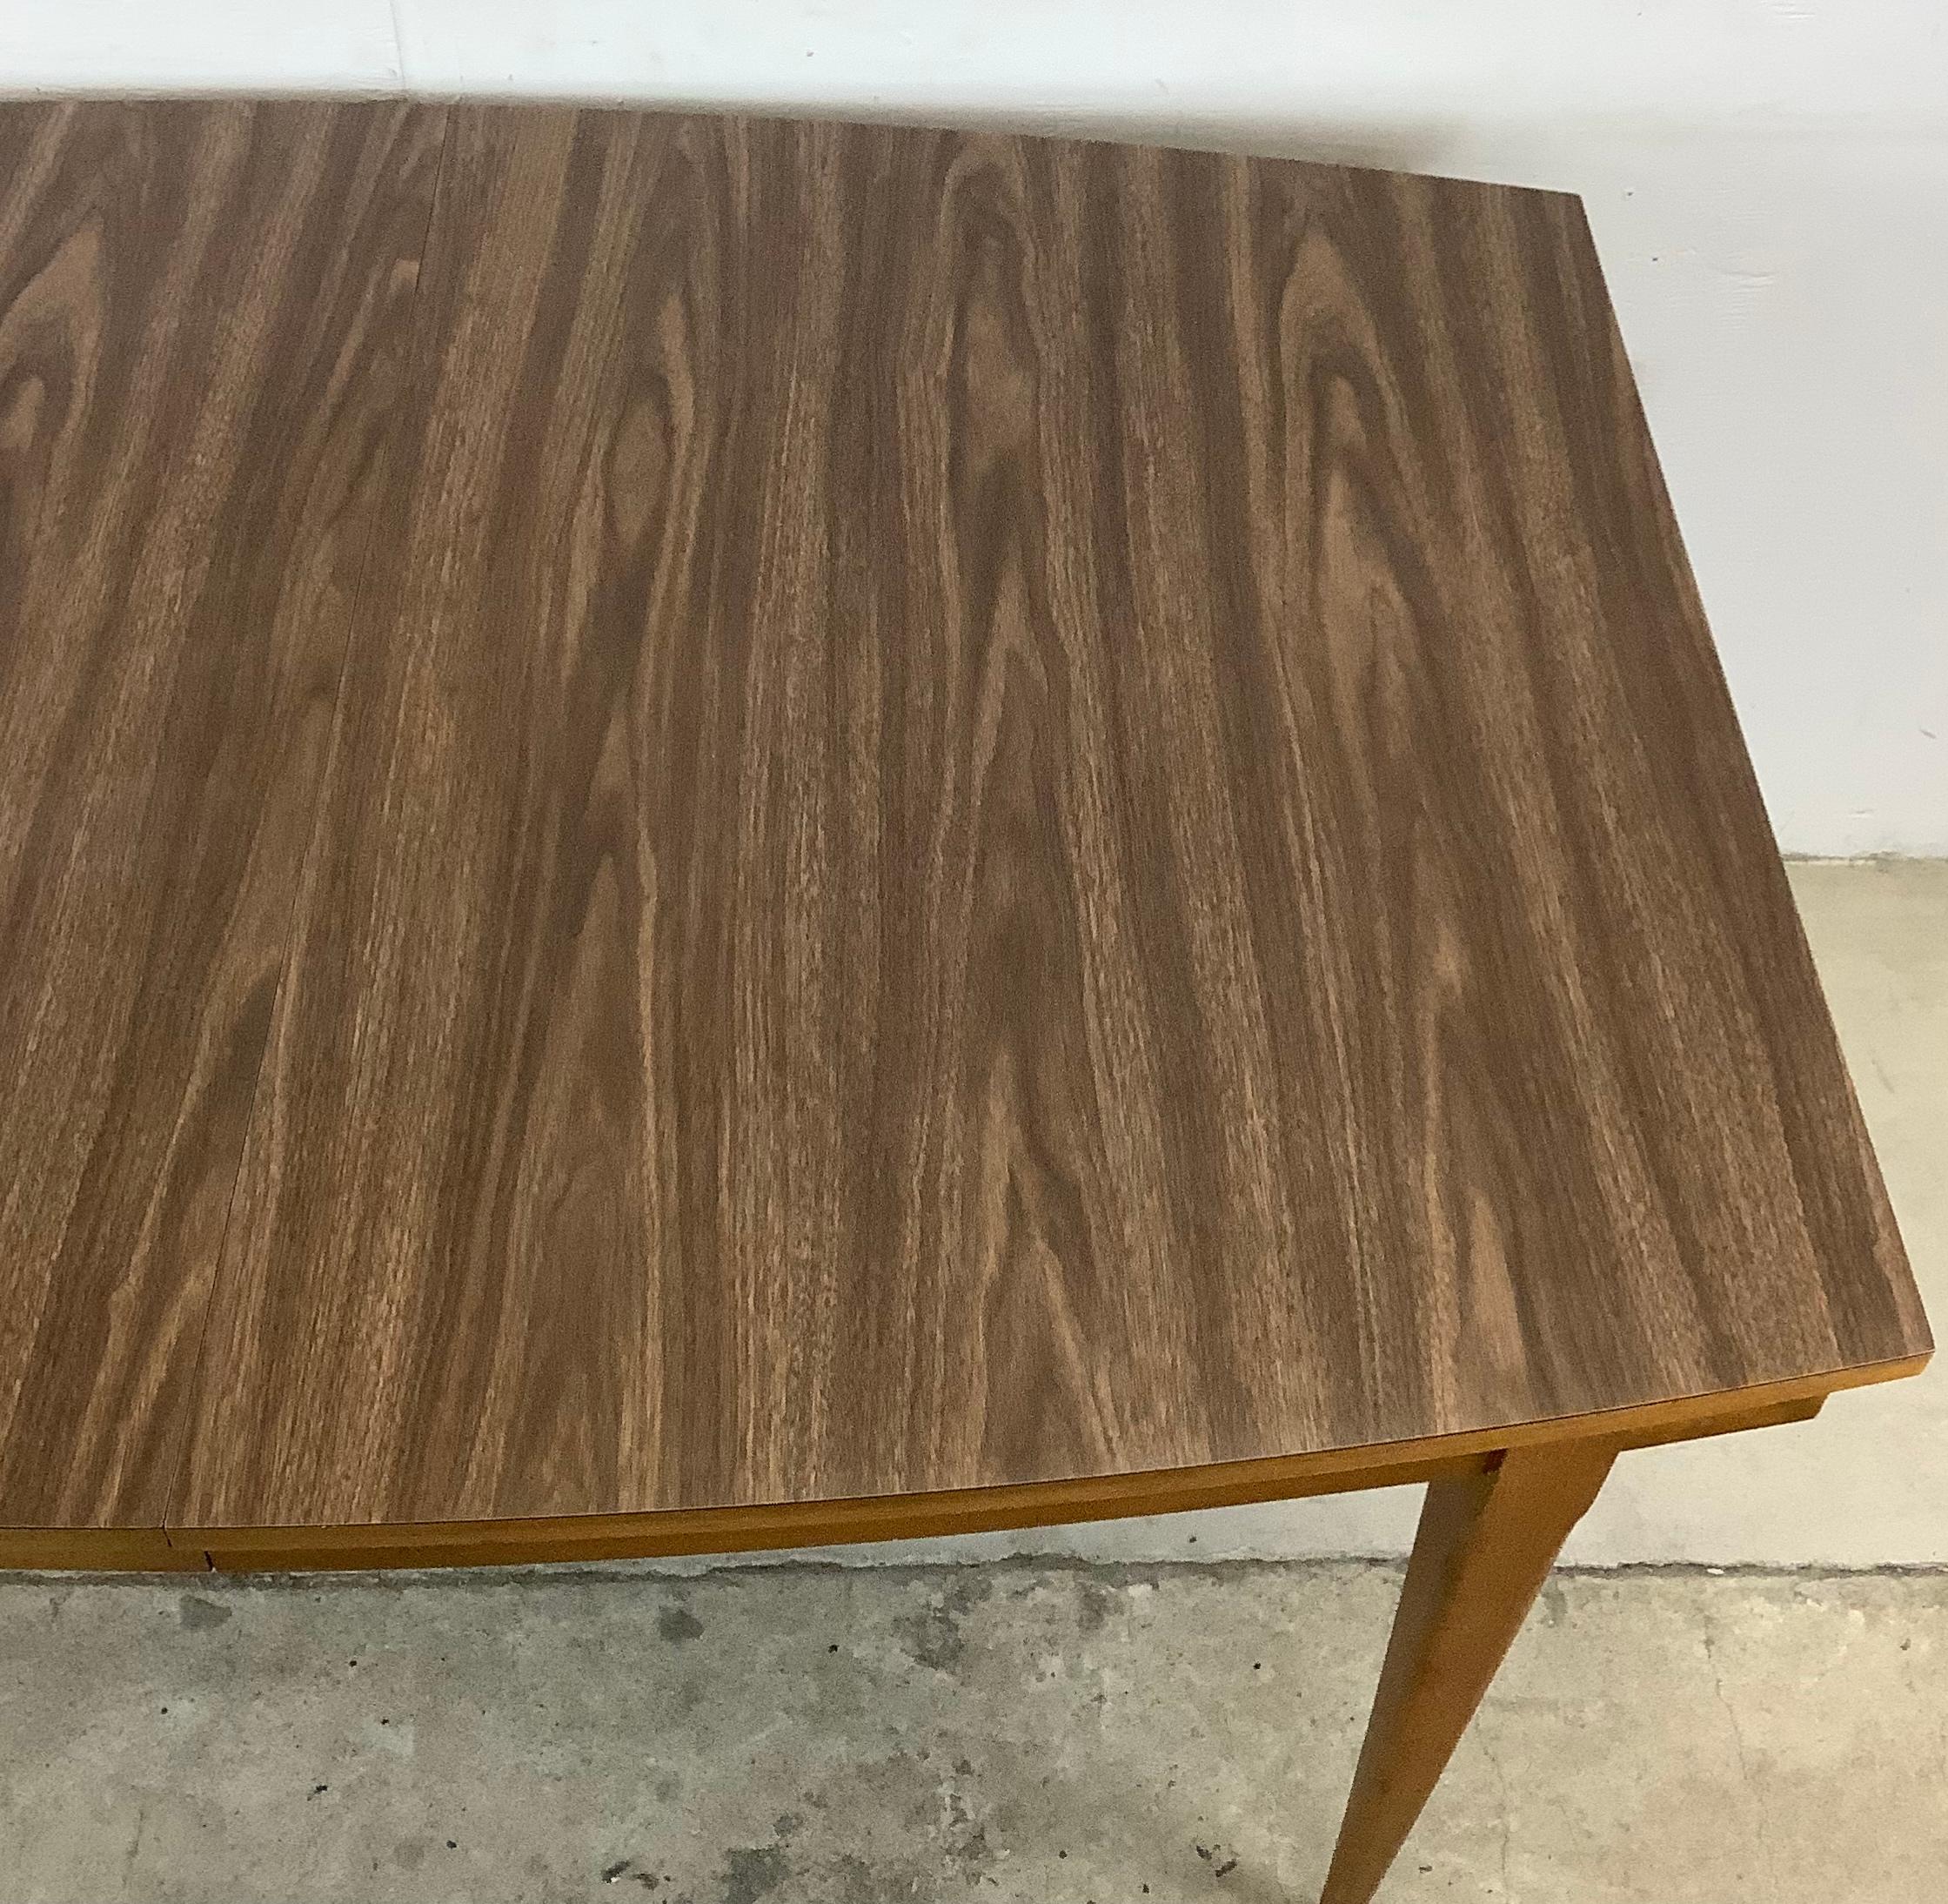 Plastic Mid-Century Modern Dining Table With Leaf For Sale